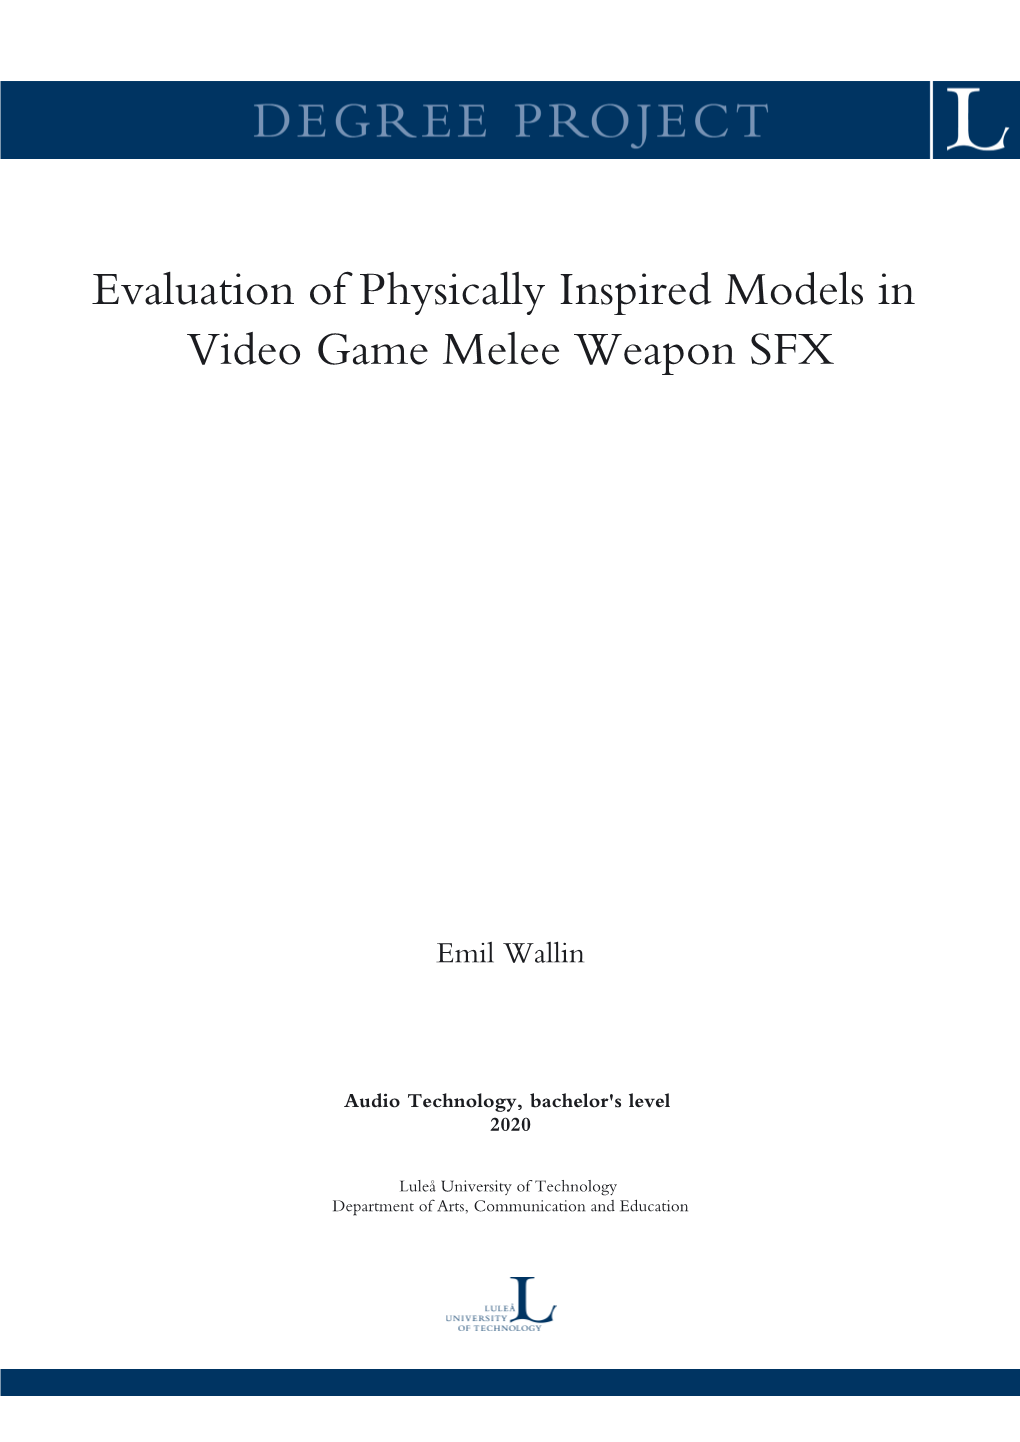 Evaluation of Physically Inspired Models in Video Game Melee Weapon SFX